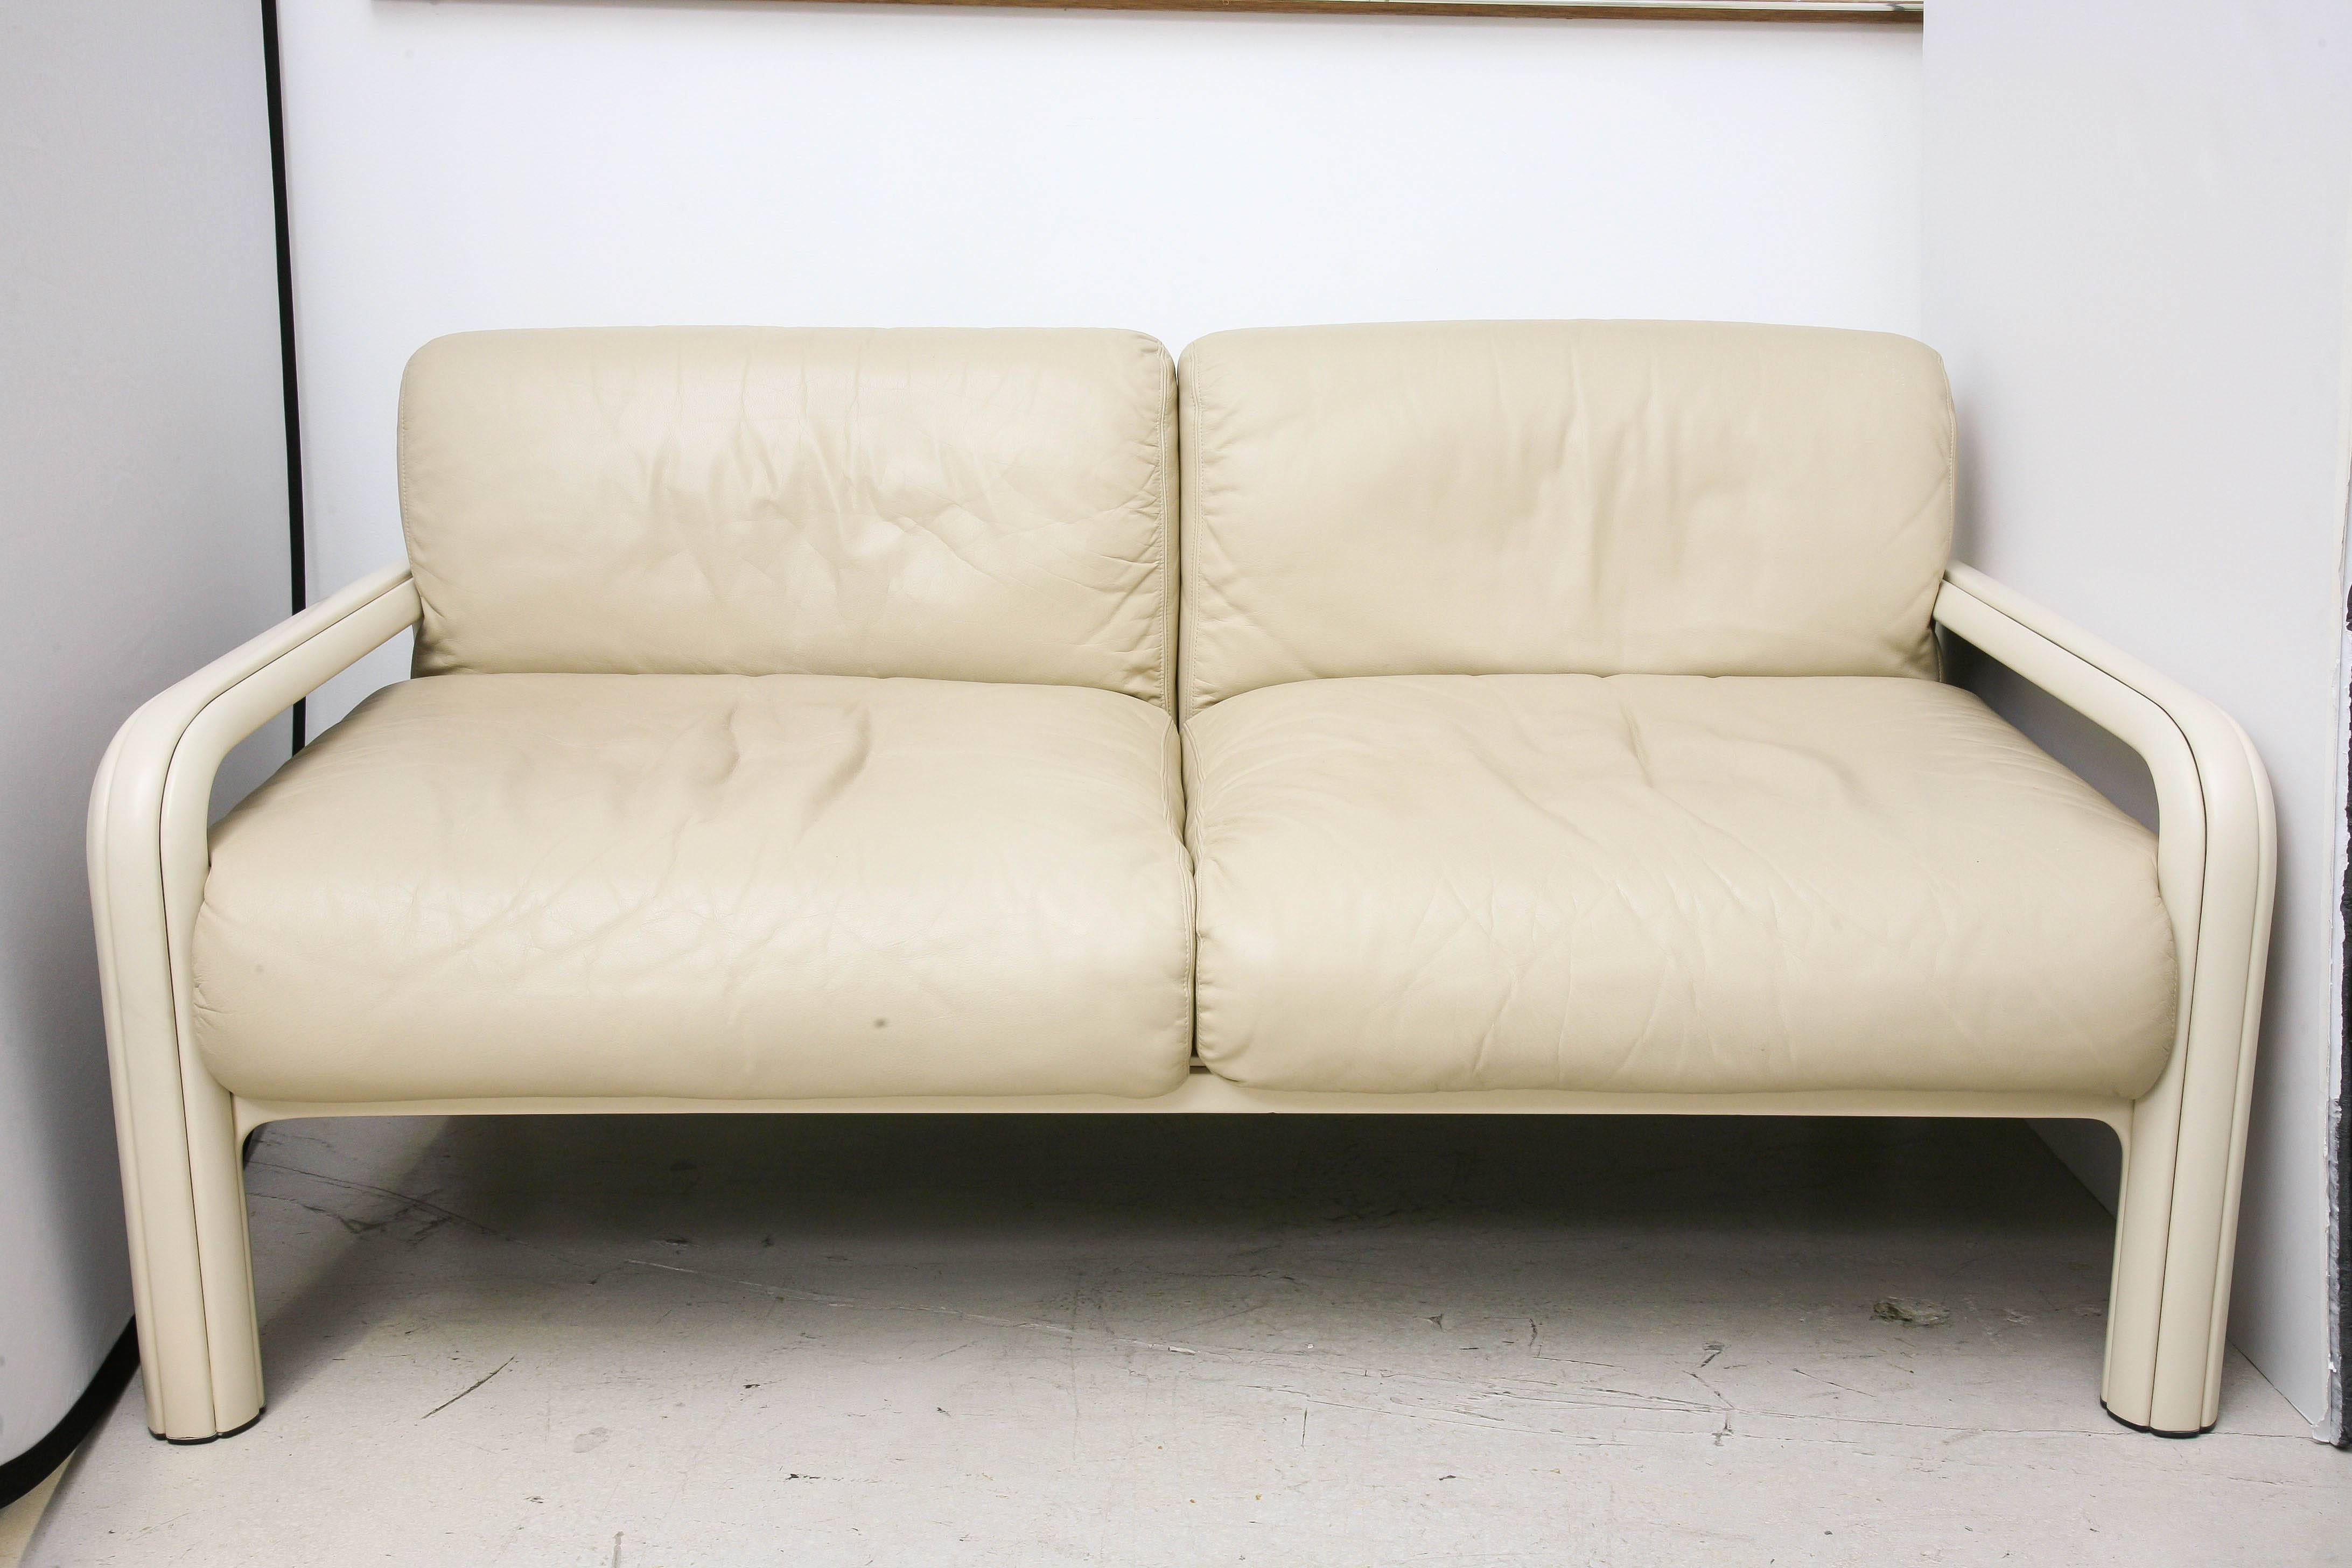 Vintage pair of Gae Aulenti for Knoll settees with taupe colored leather.